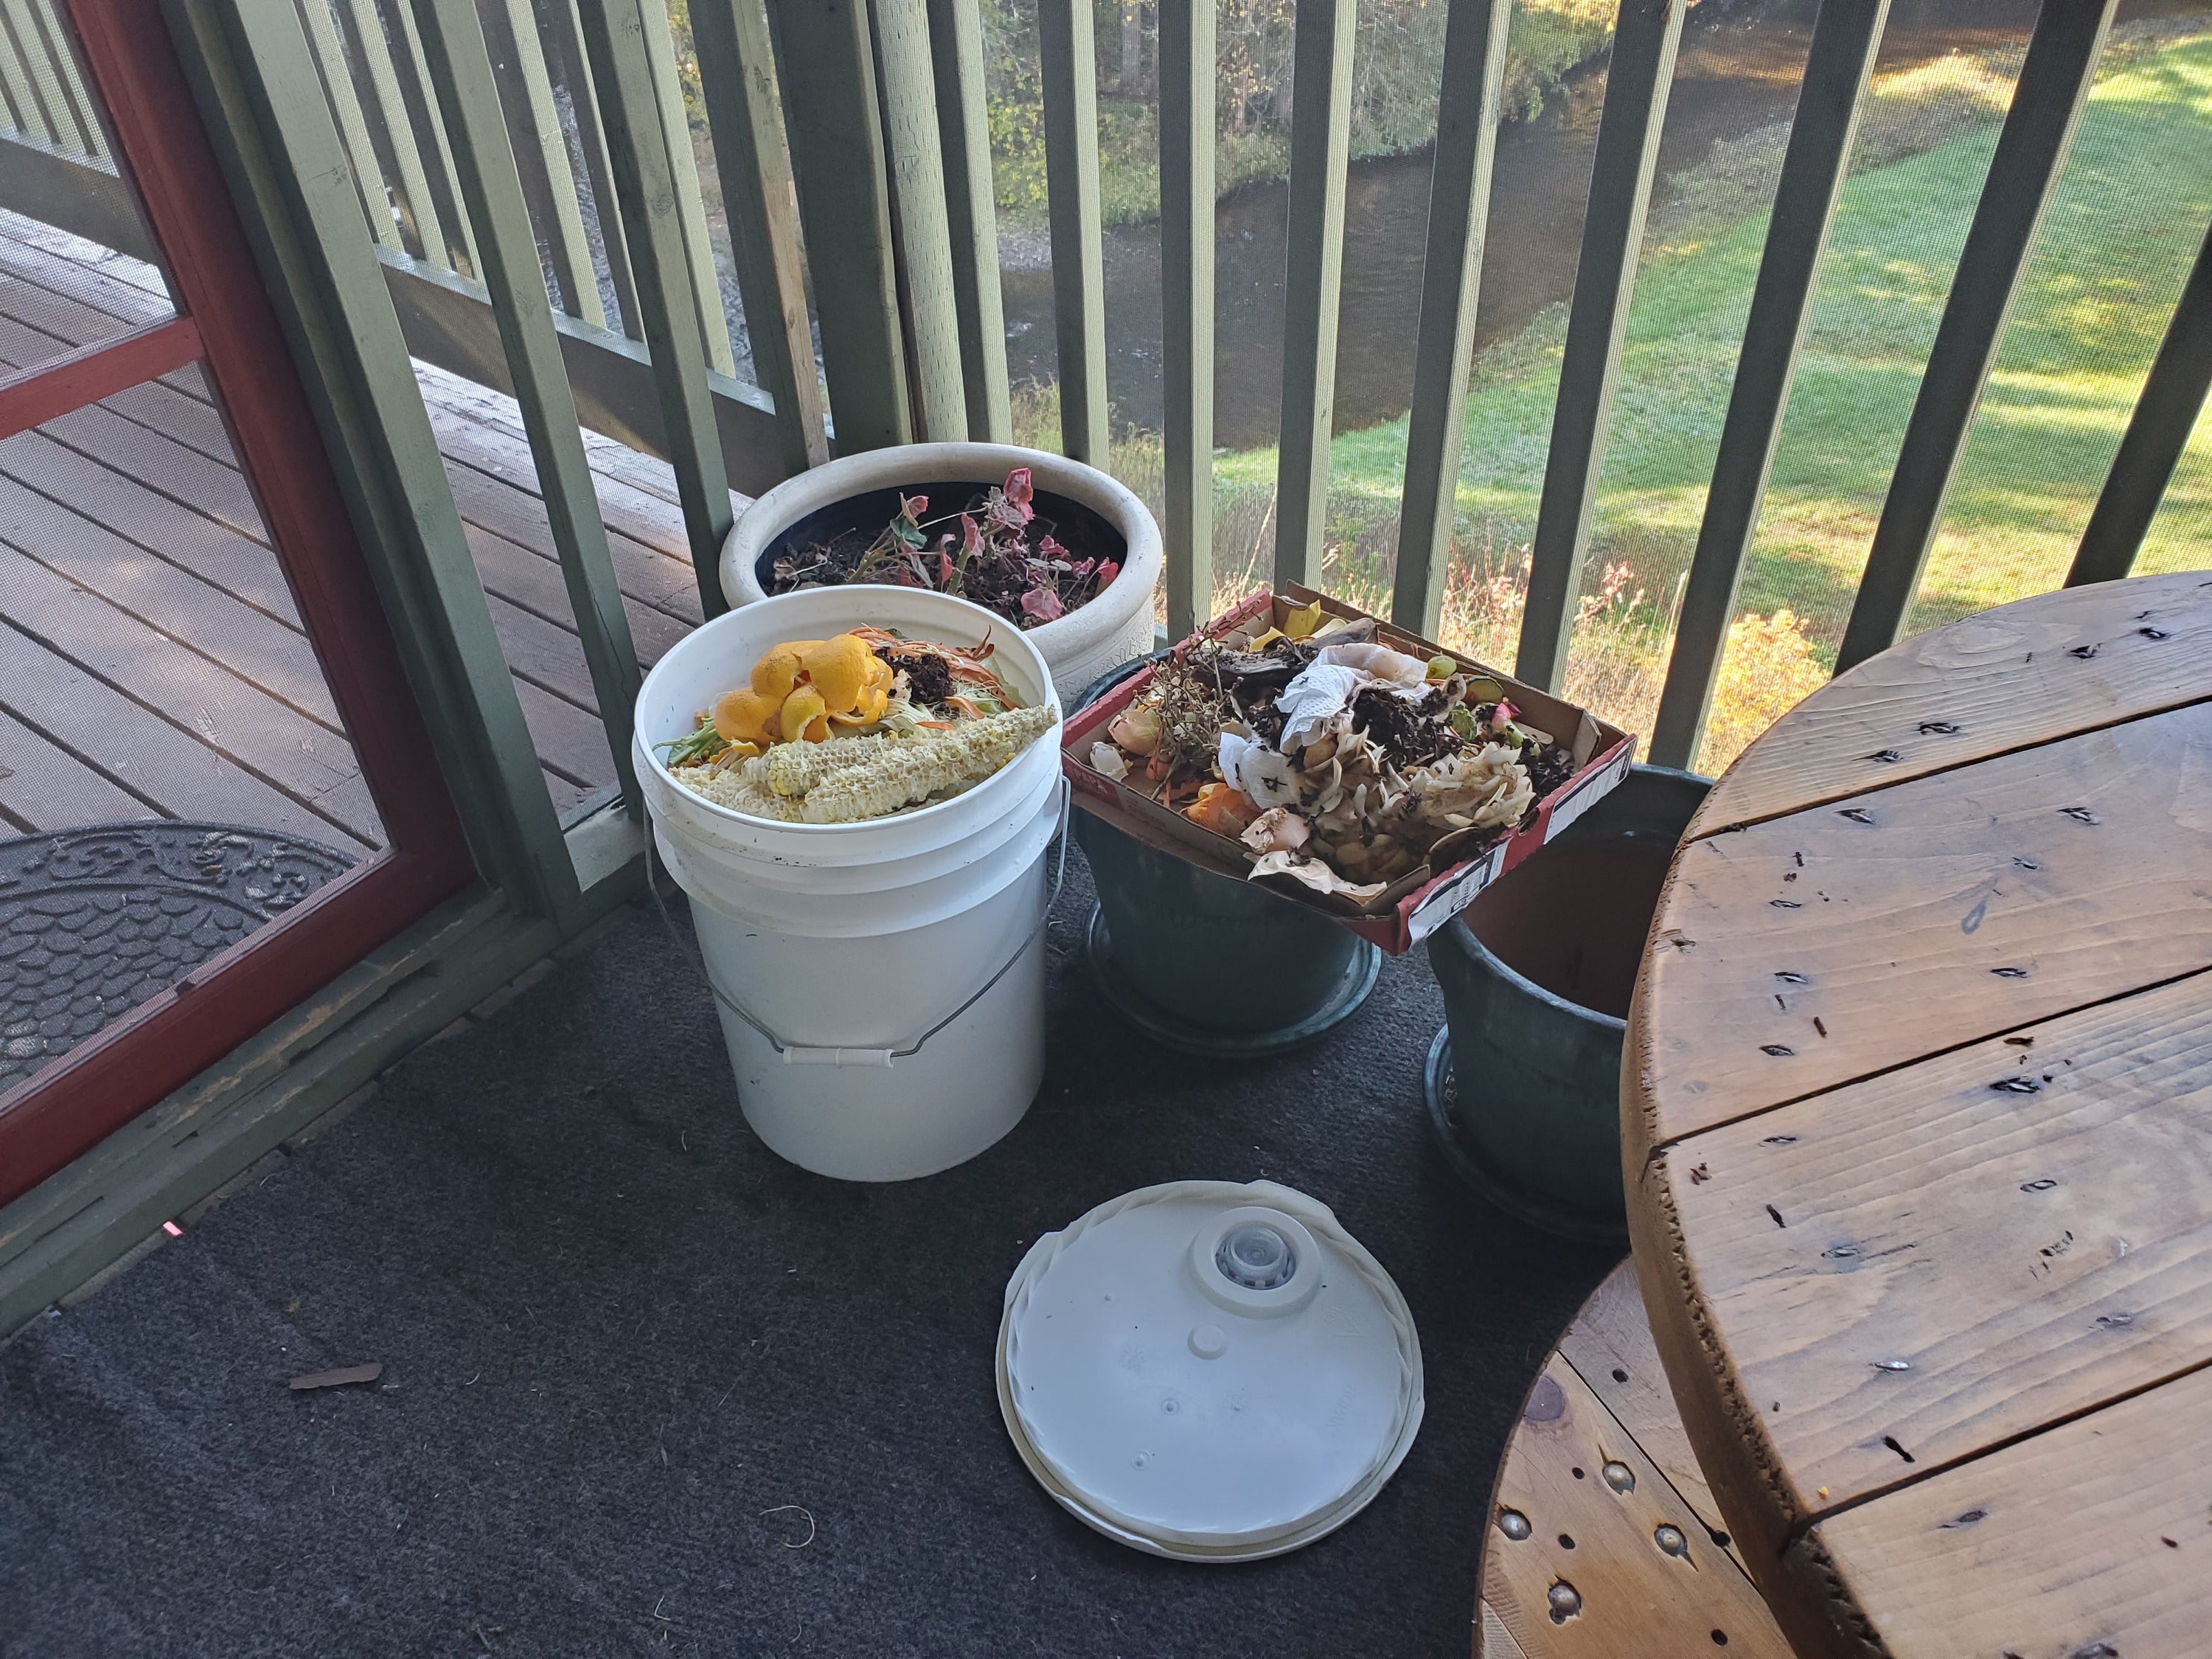 A Food Waste Collection Ready for Composting